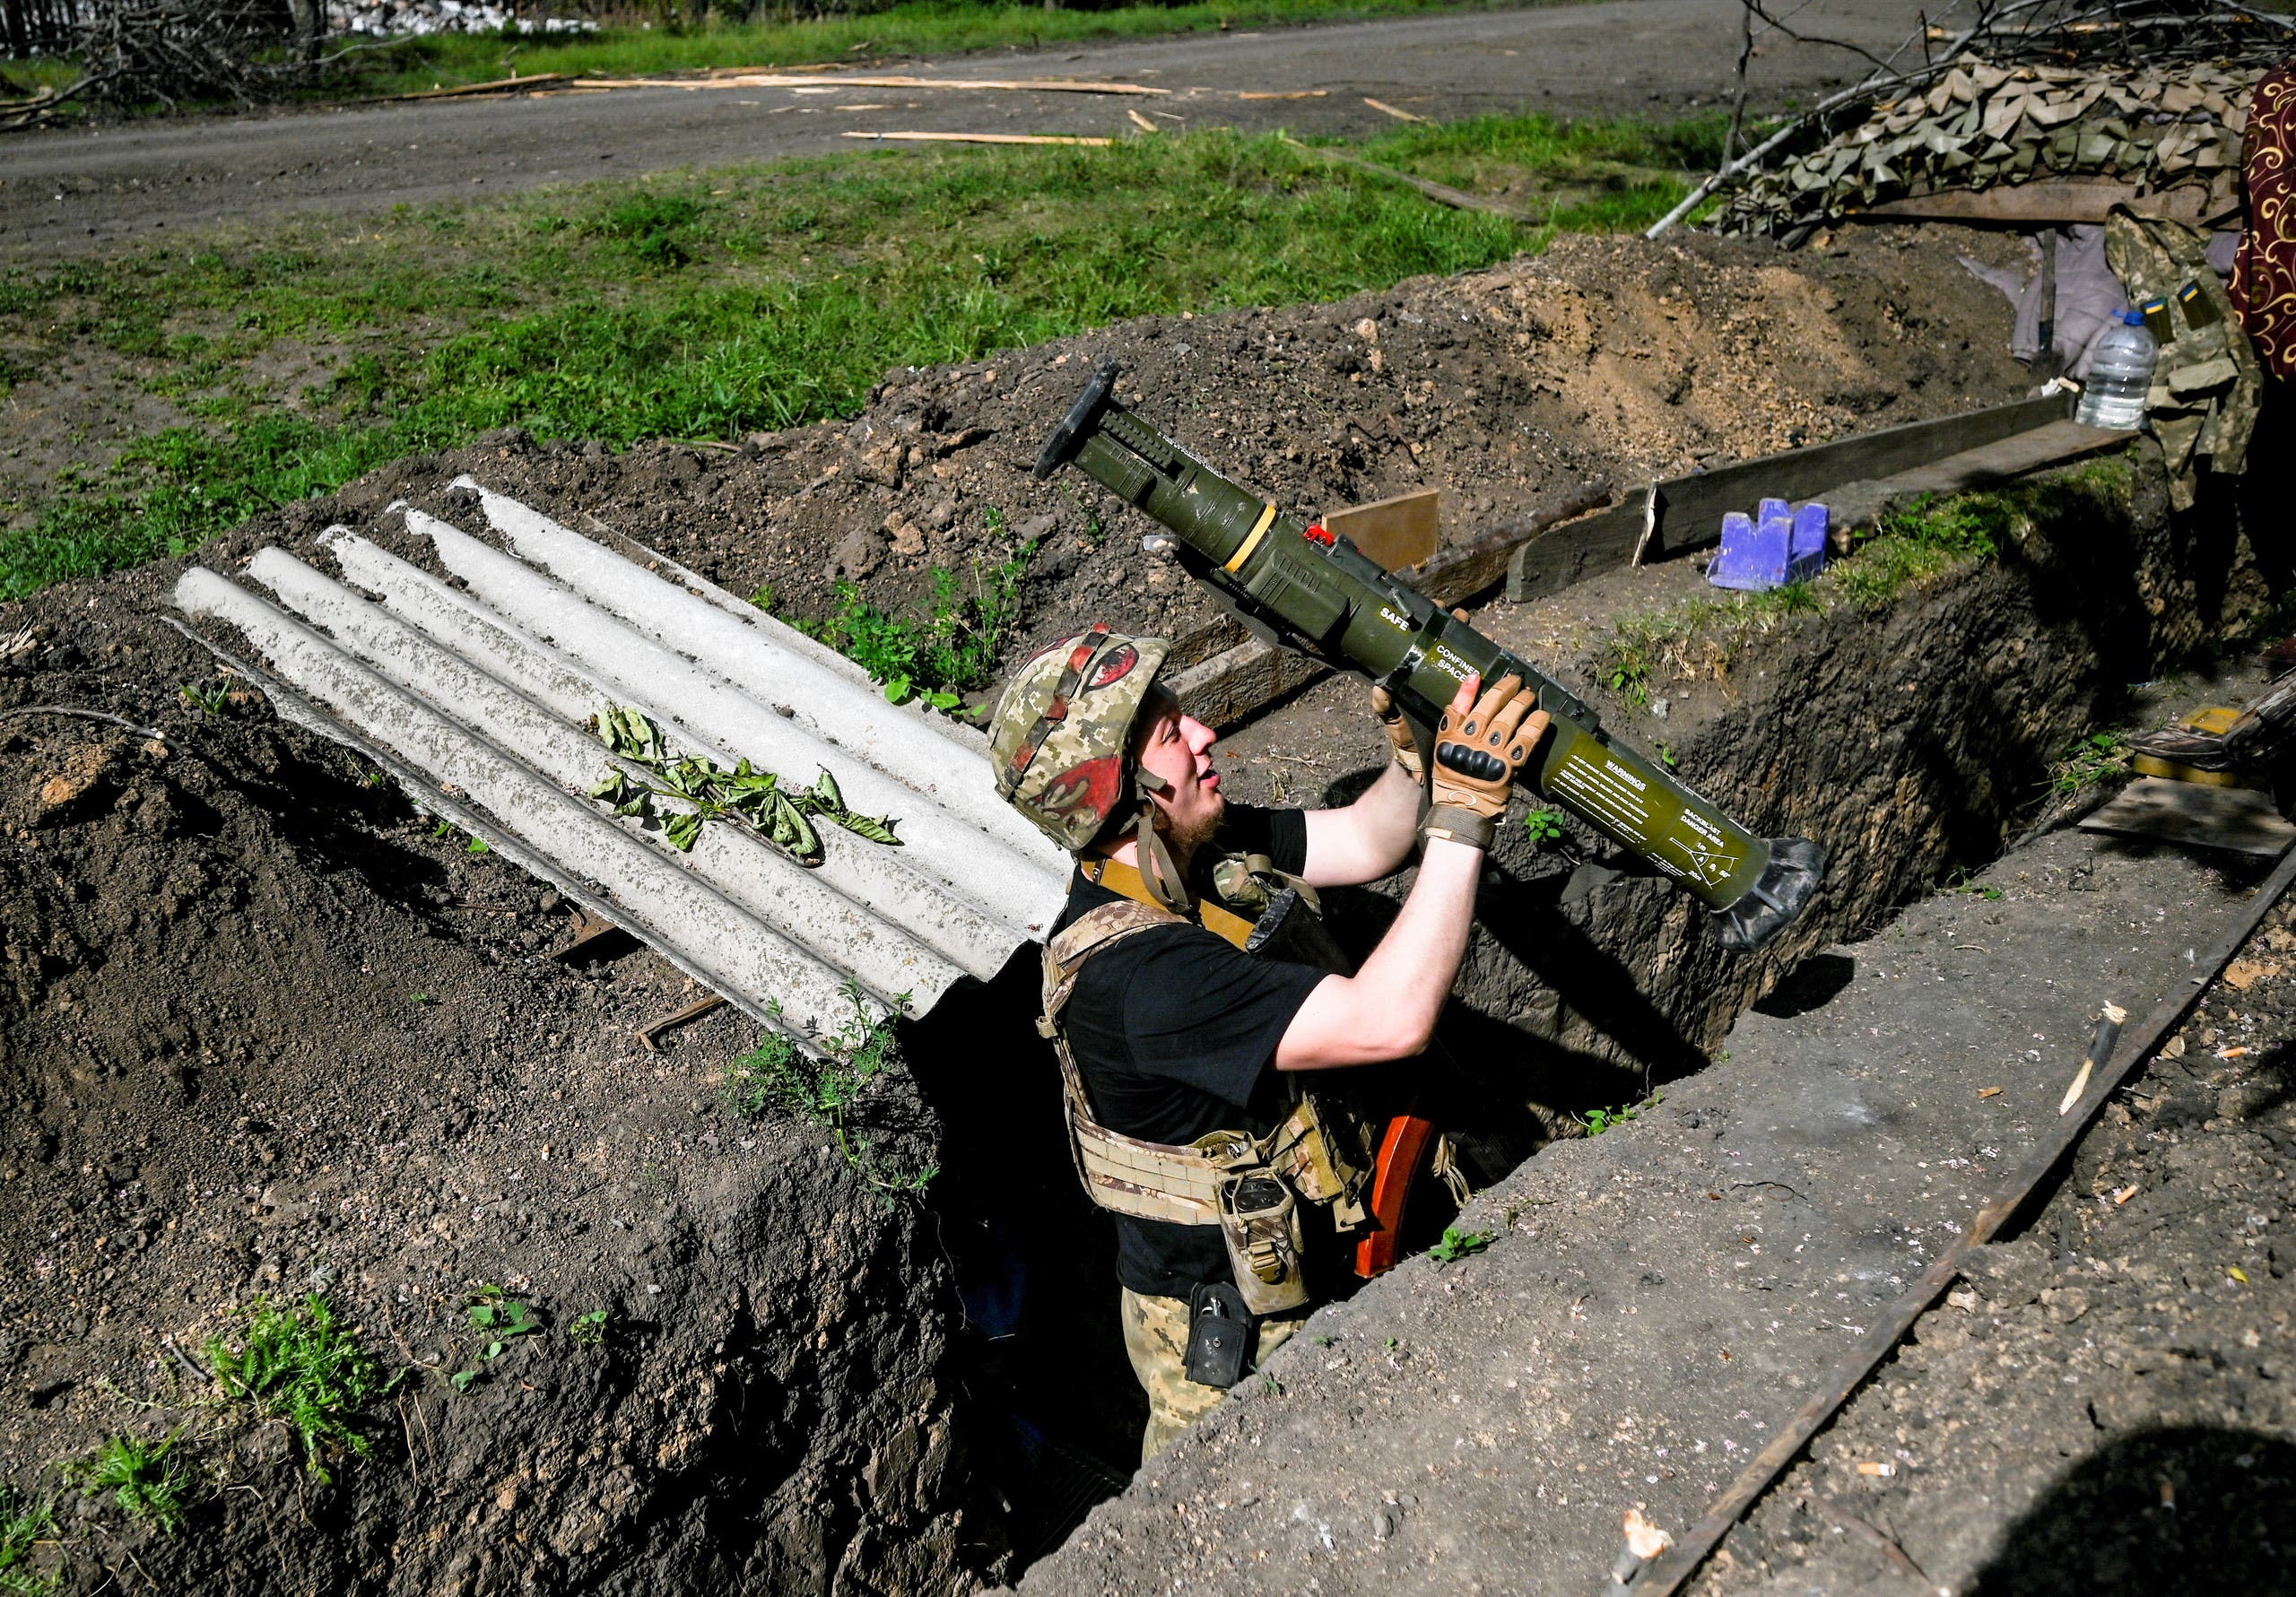 Ukrainian soldier reinforces army positions in Donetsk